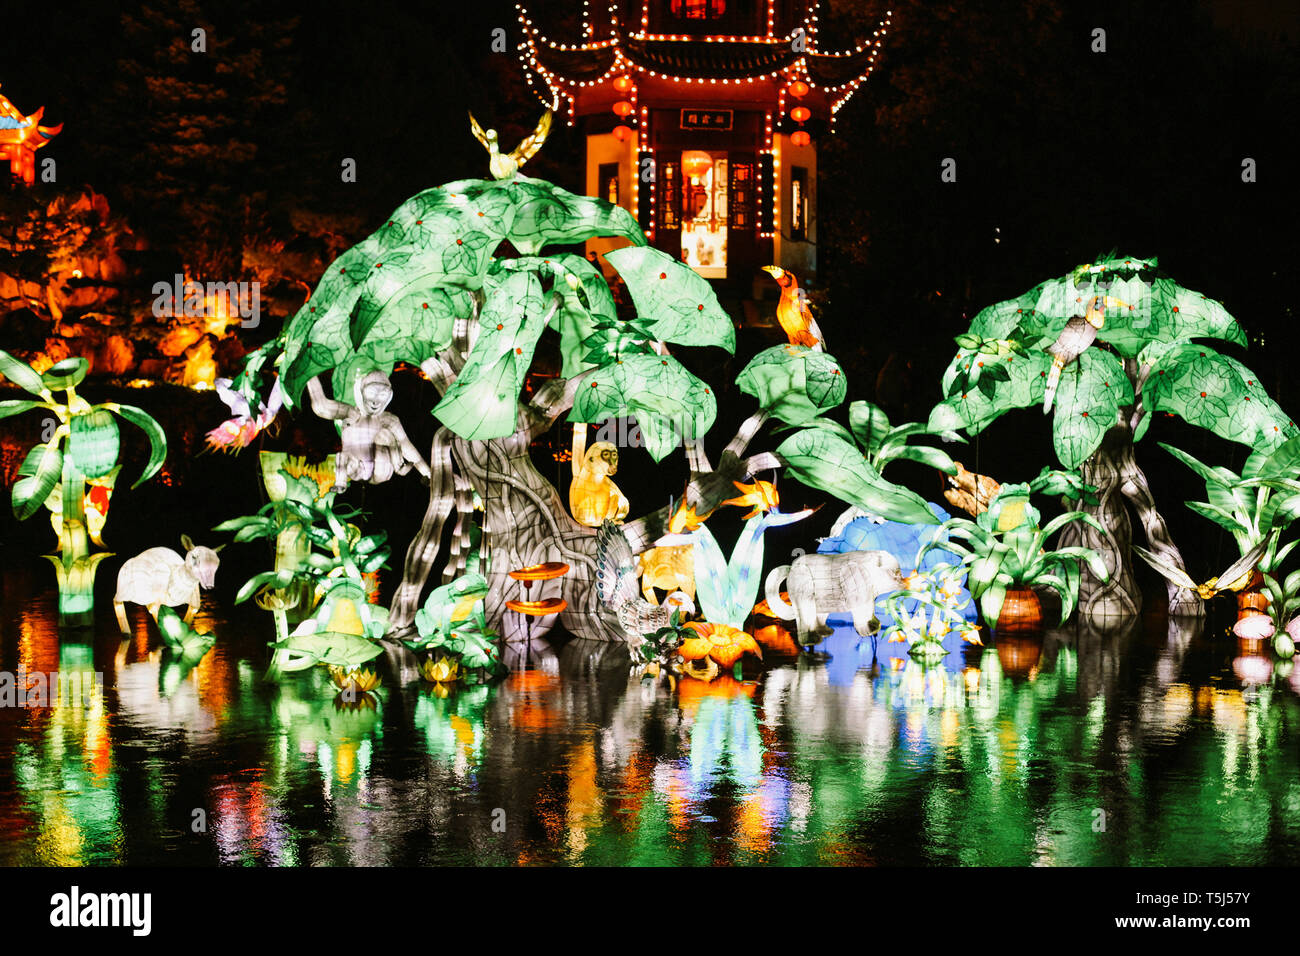 Gardens Of Light Chinese Lantern Festival At The Montreal